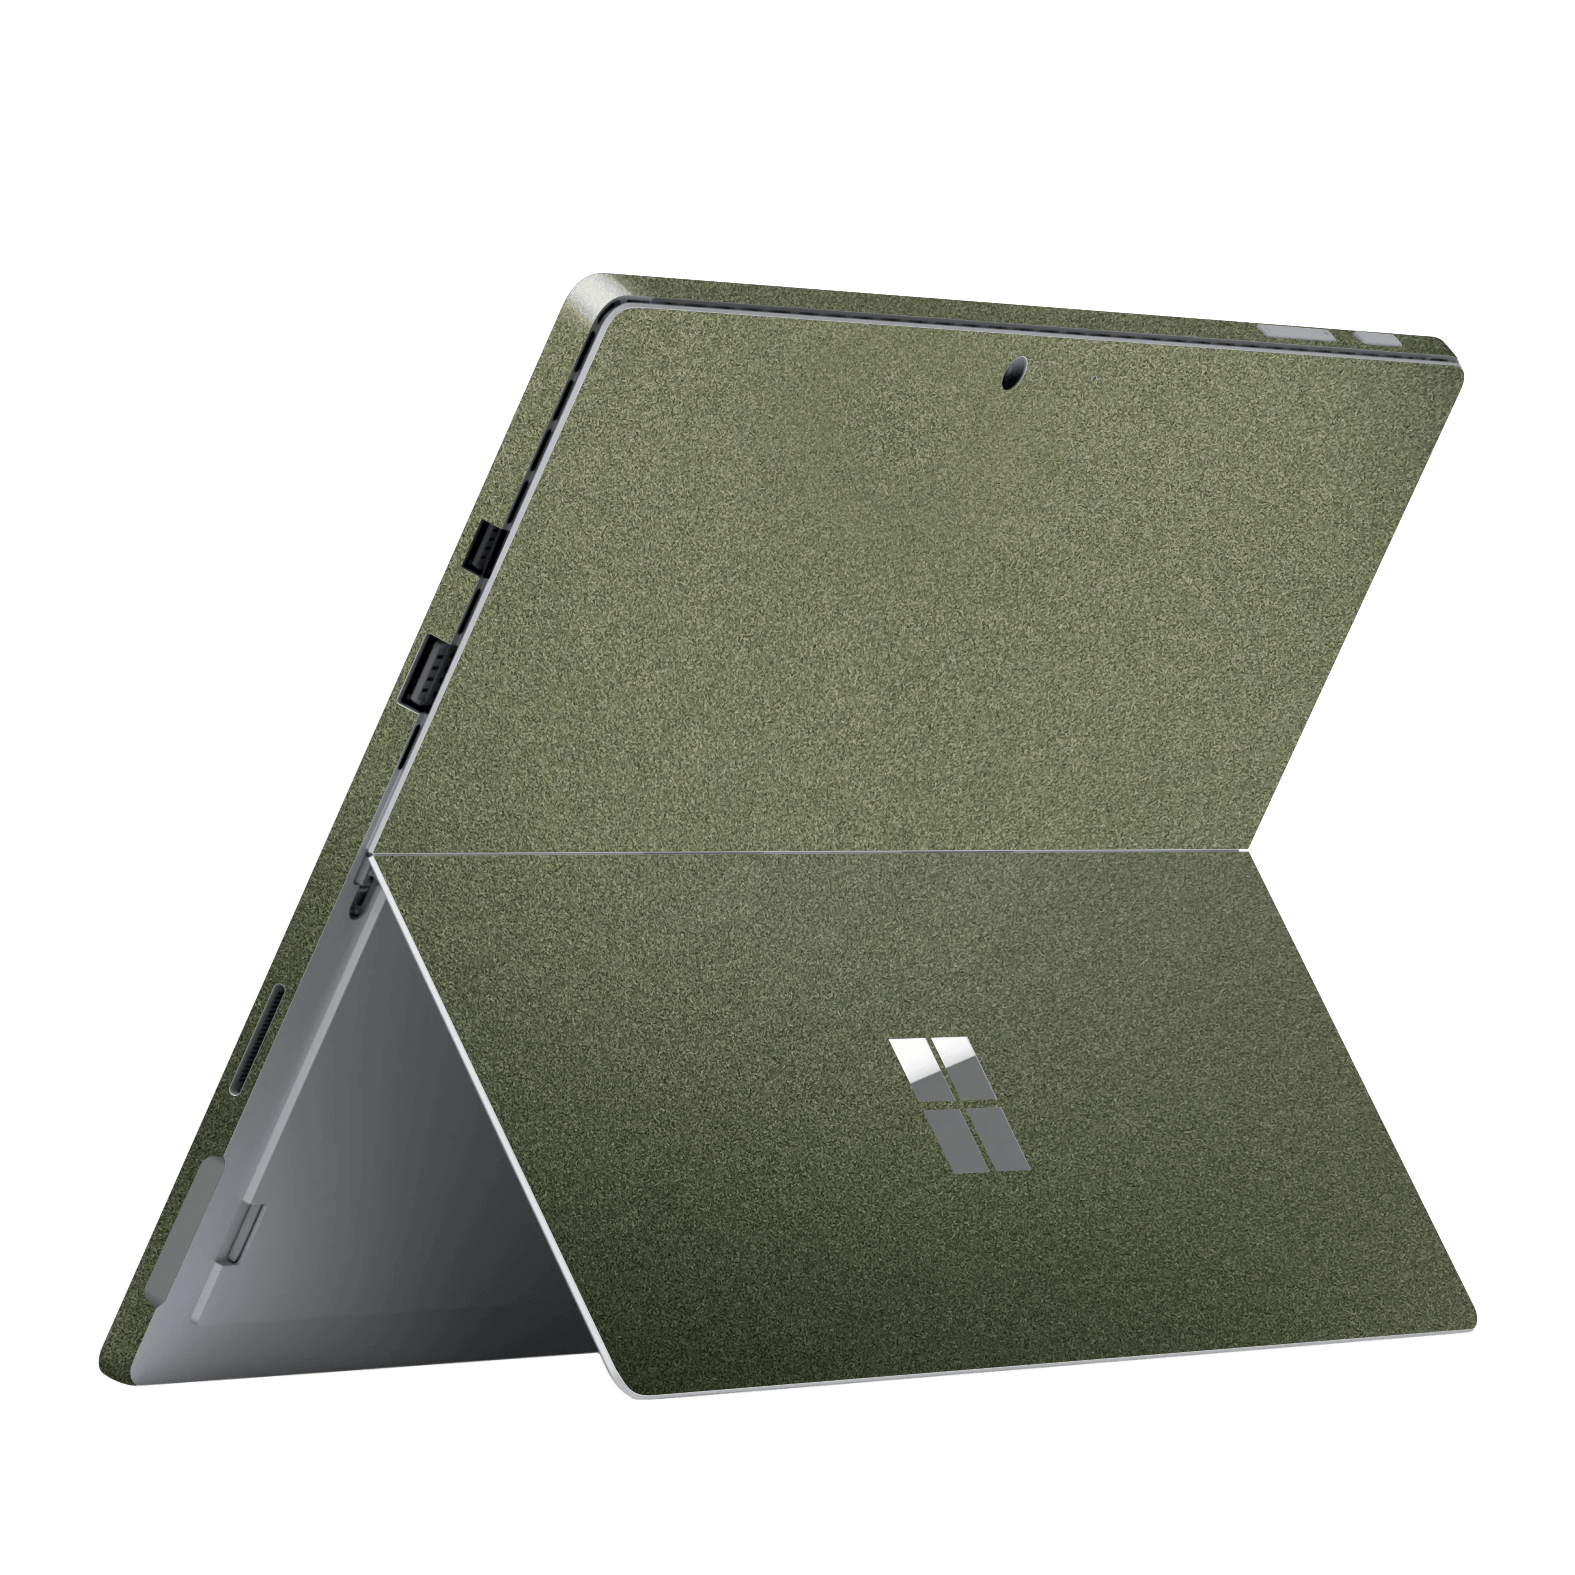 Microsoft Surface Pro 6 Gloss Glossy Military Green Metallic Skin Wrap Sticker Decal Cover Protector by EasySkinz